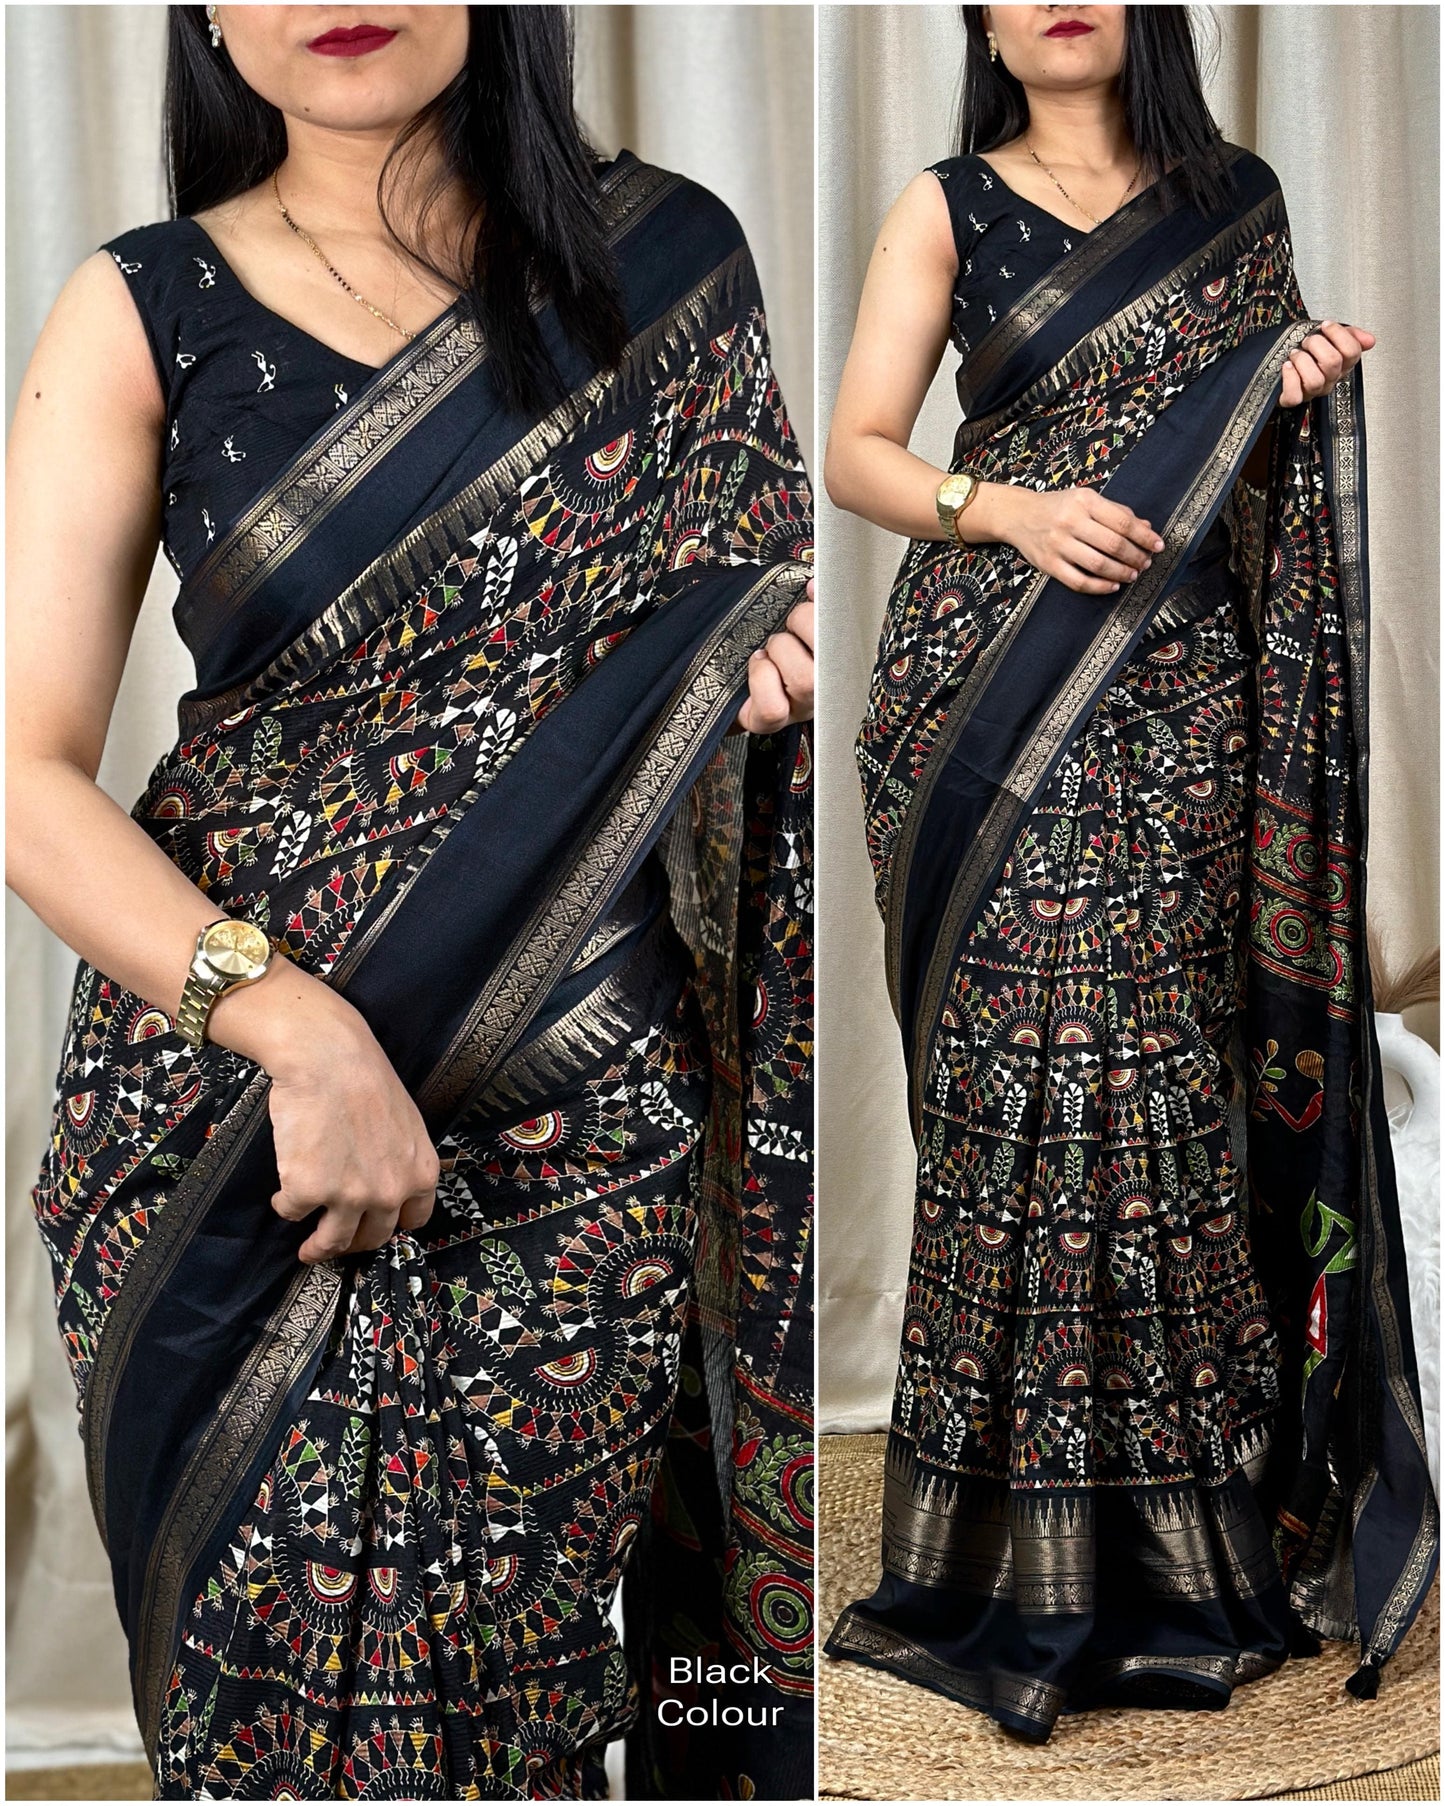 Our Dreamy kalamkari print saree is here to make you the queen of the fashion jungle